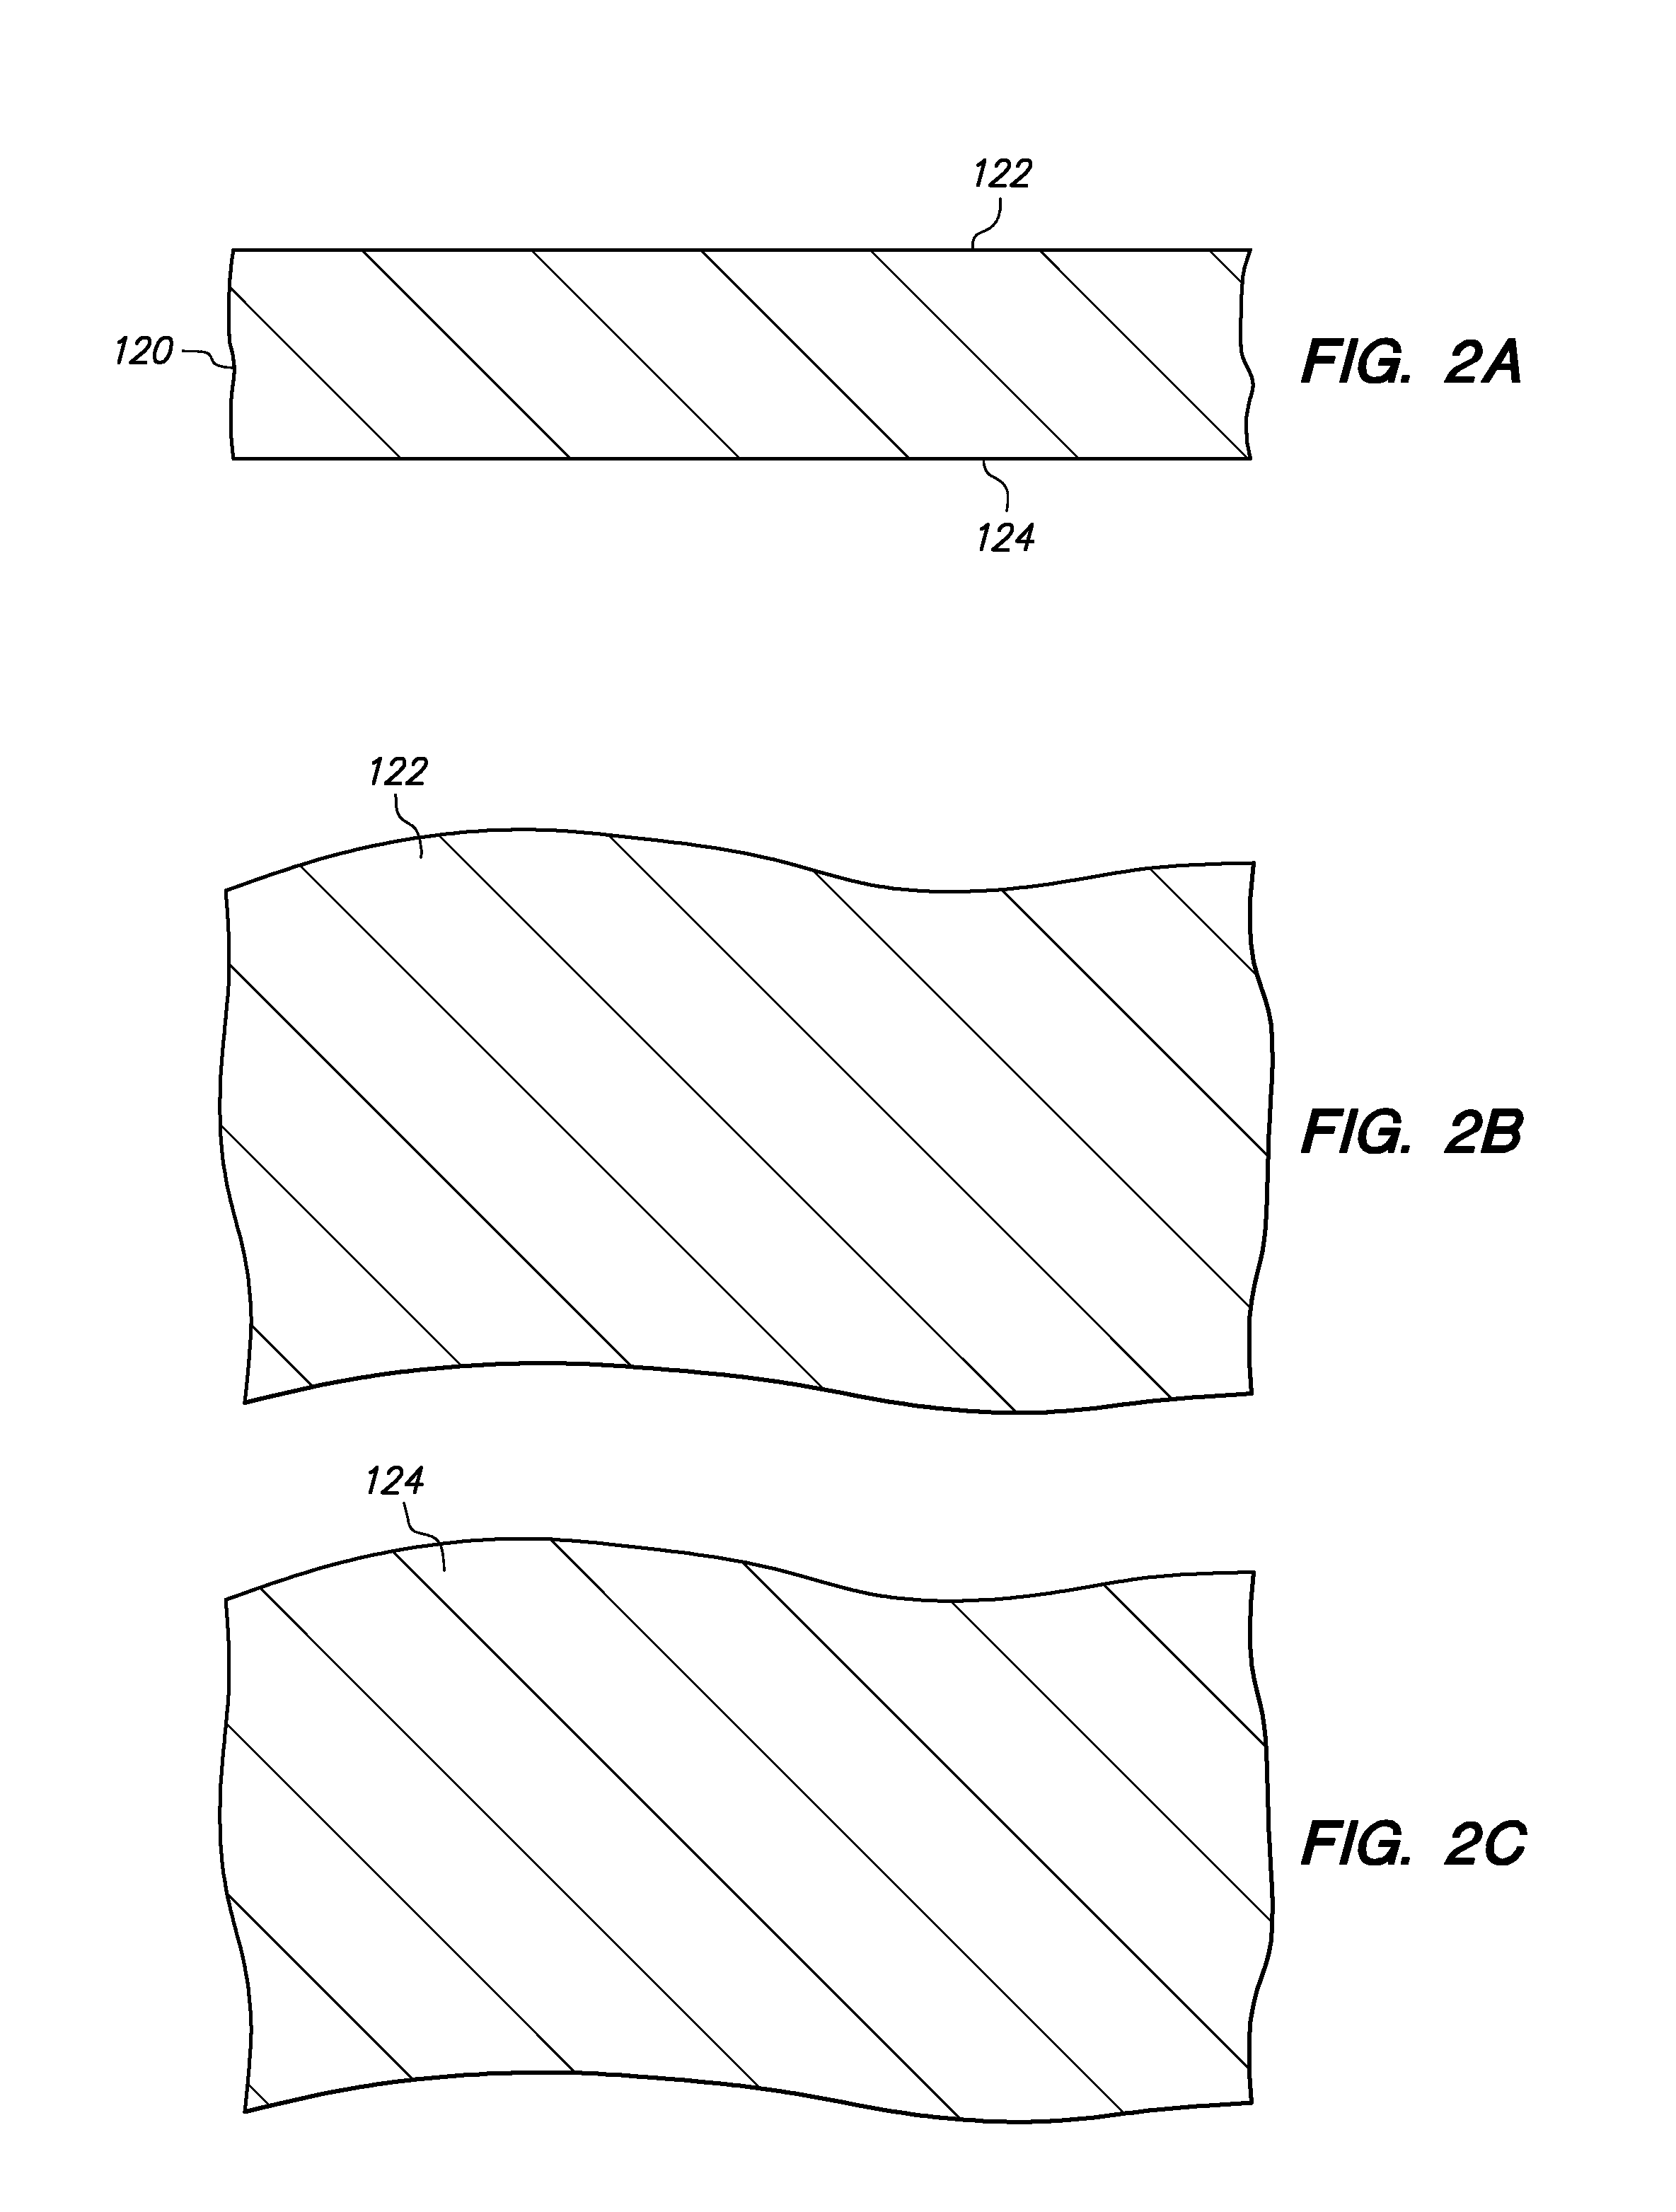 Method of making a semiconductor chip assembly with metal pillar and encapsulant grinding and heat sink attachment